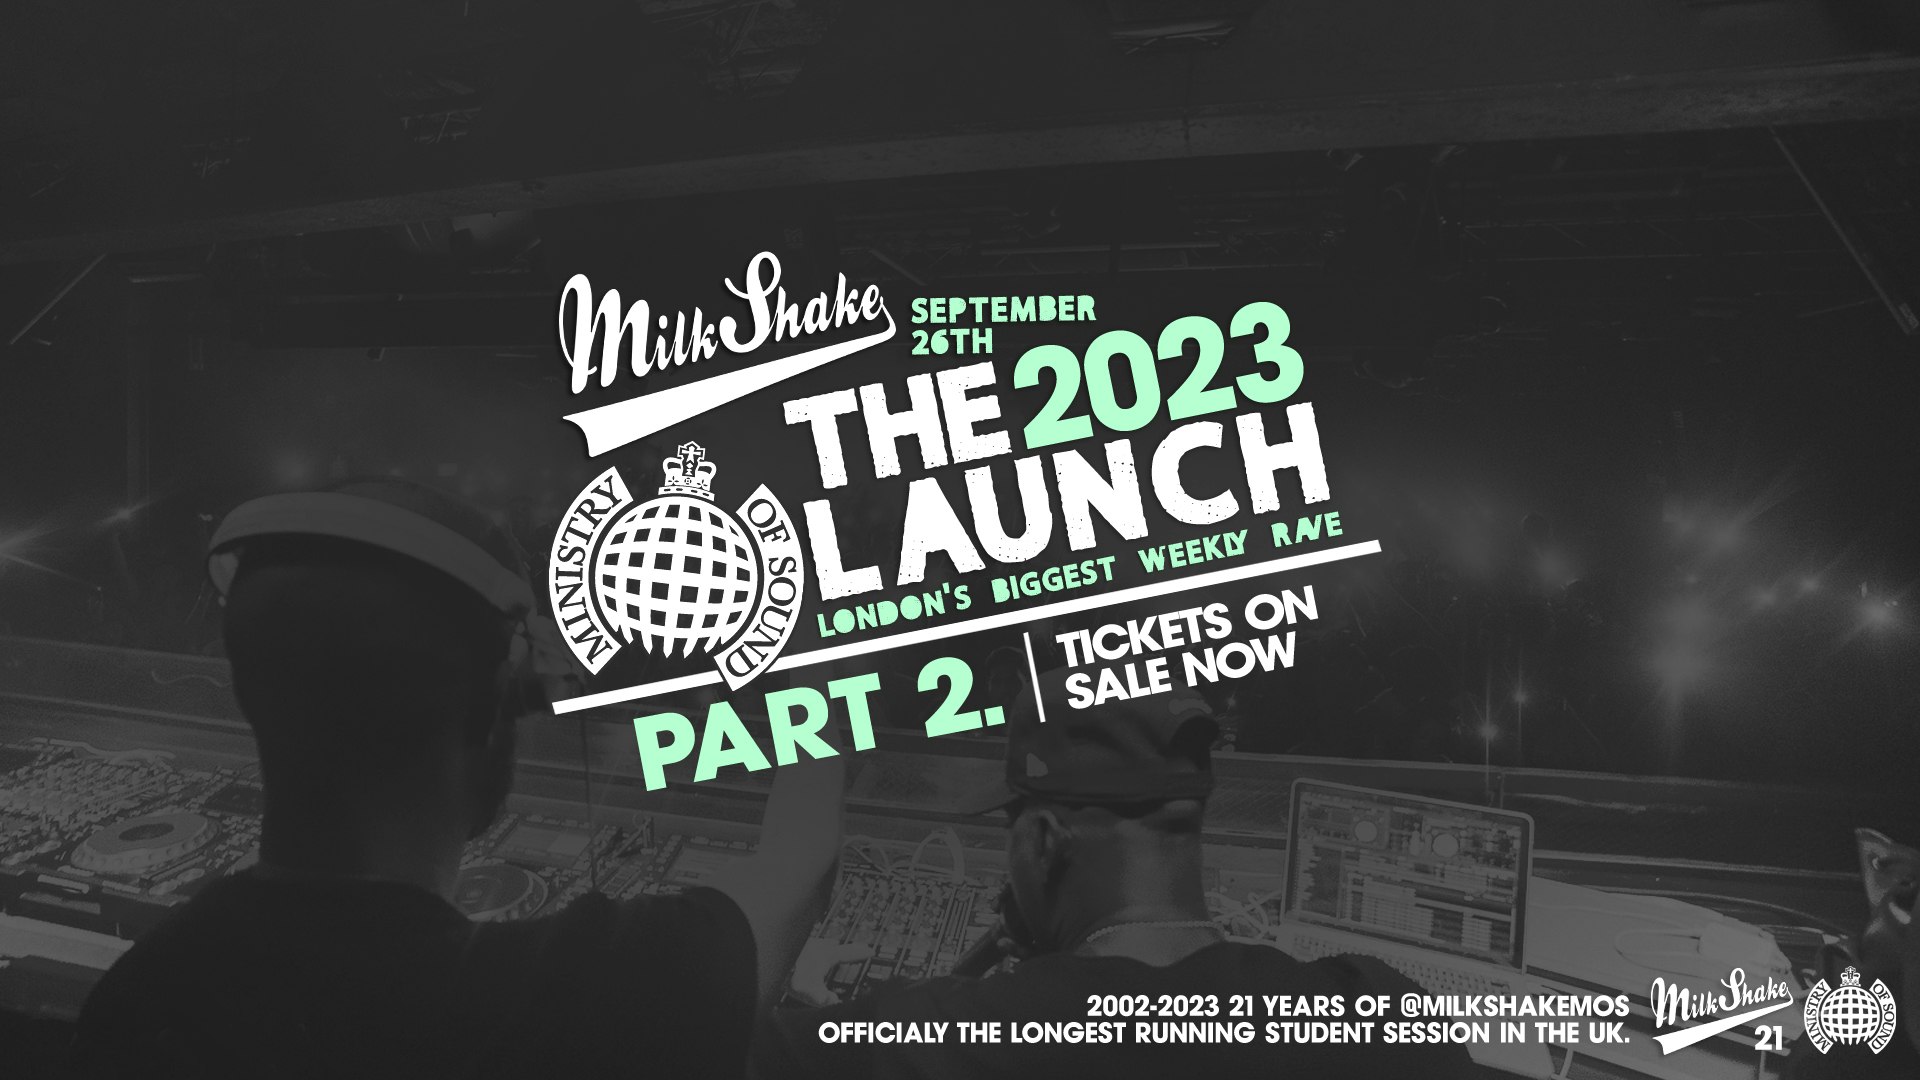 ⚠️ SOLD OUT ⚠️ Ministry of Sound, Milkshake – Official London Freshers Launch Part 2 ⚠️ SOLD OUT ⚠️